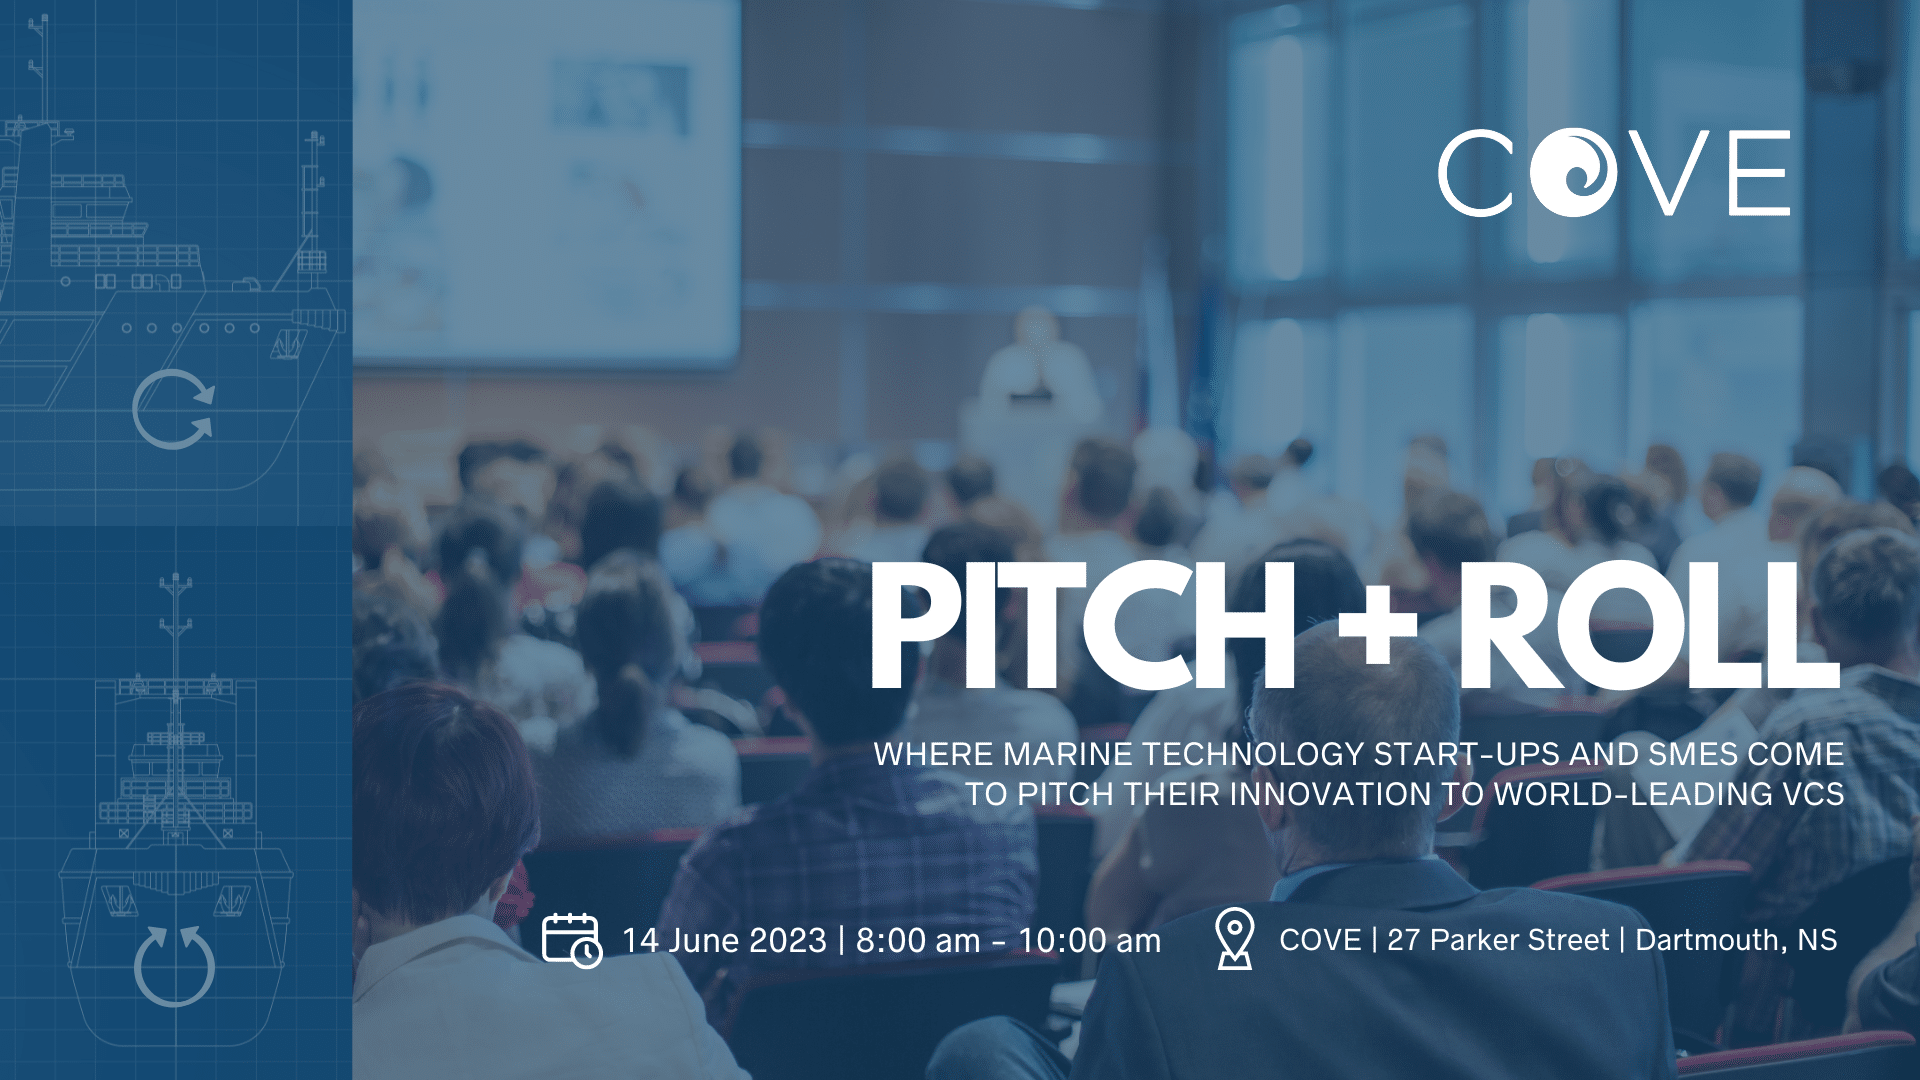 COVE to Host Pitch Session With VCs